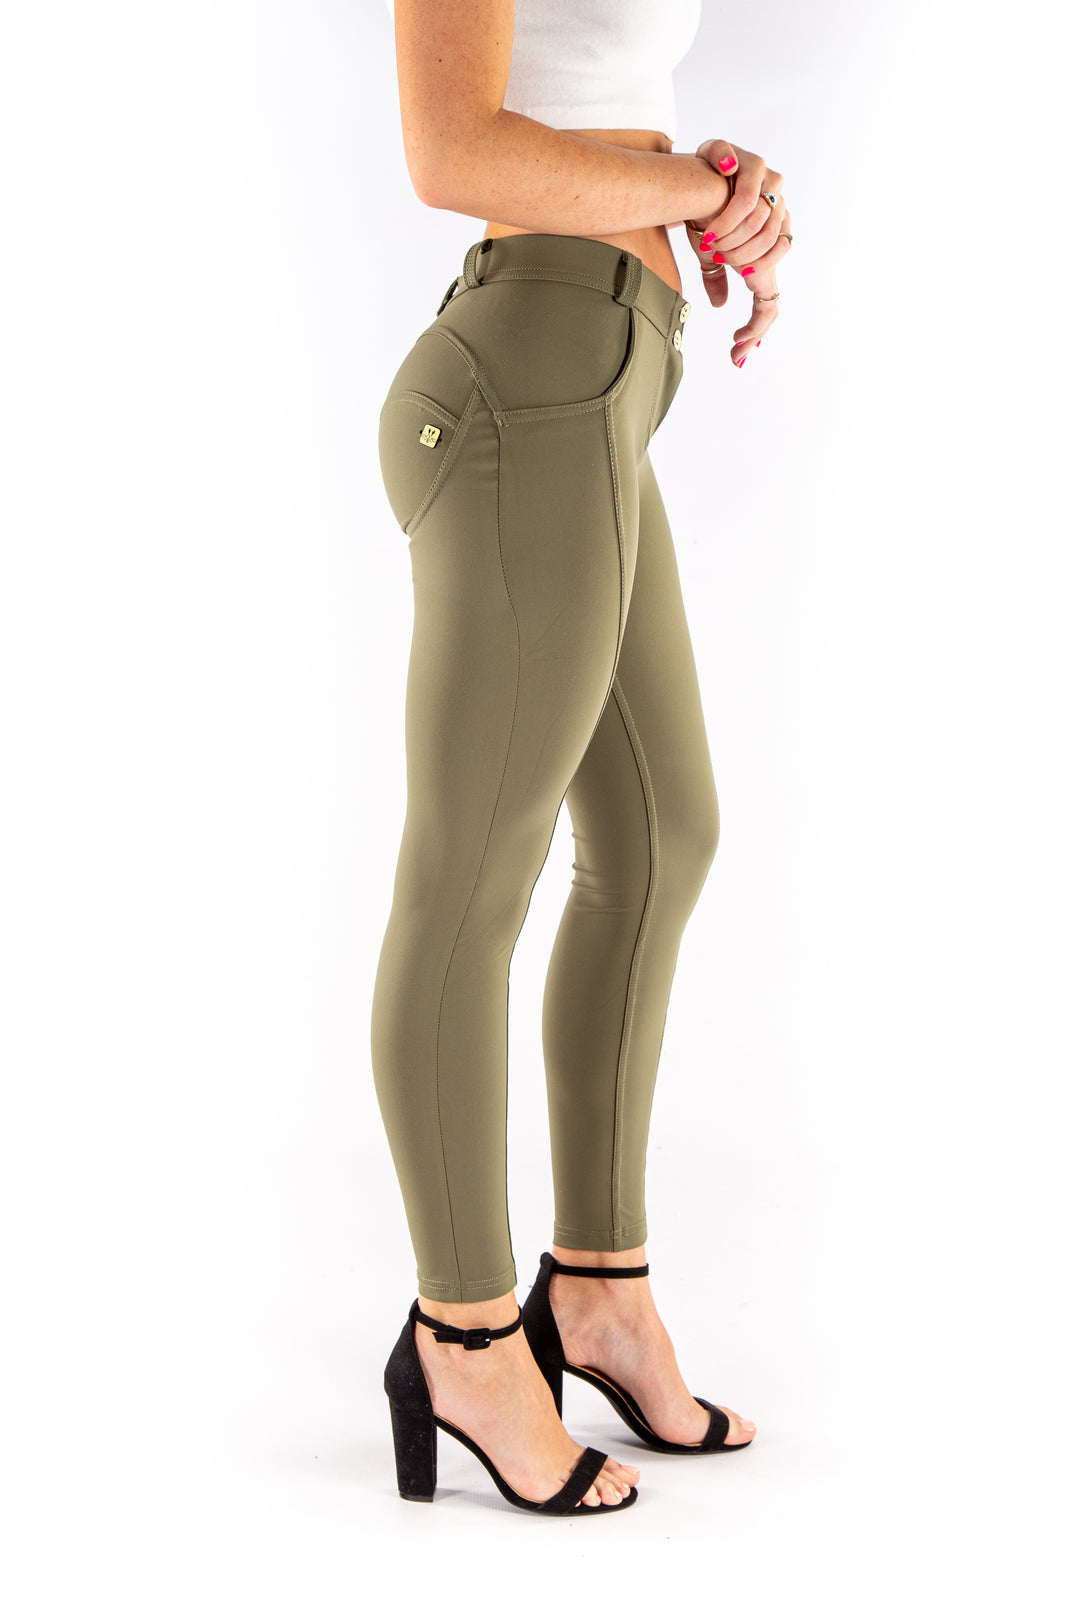 Low waist hipster Butt lifting shaping leggings -  Silky soft Spandex Oliveaos-init aos-animate